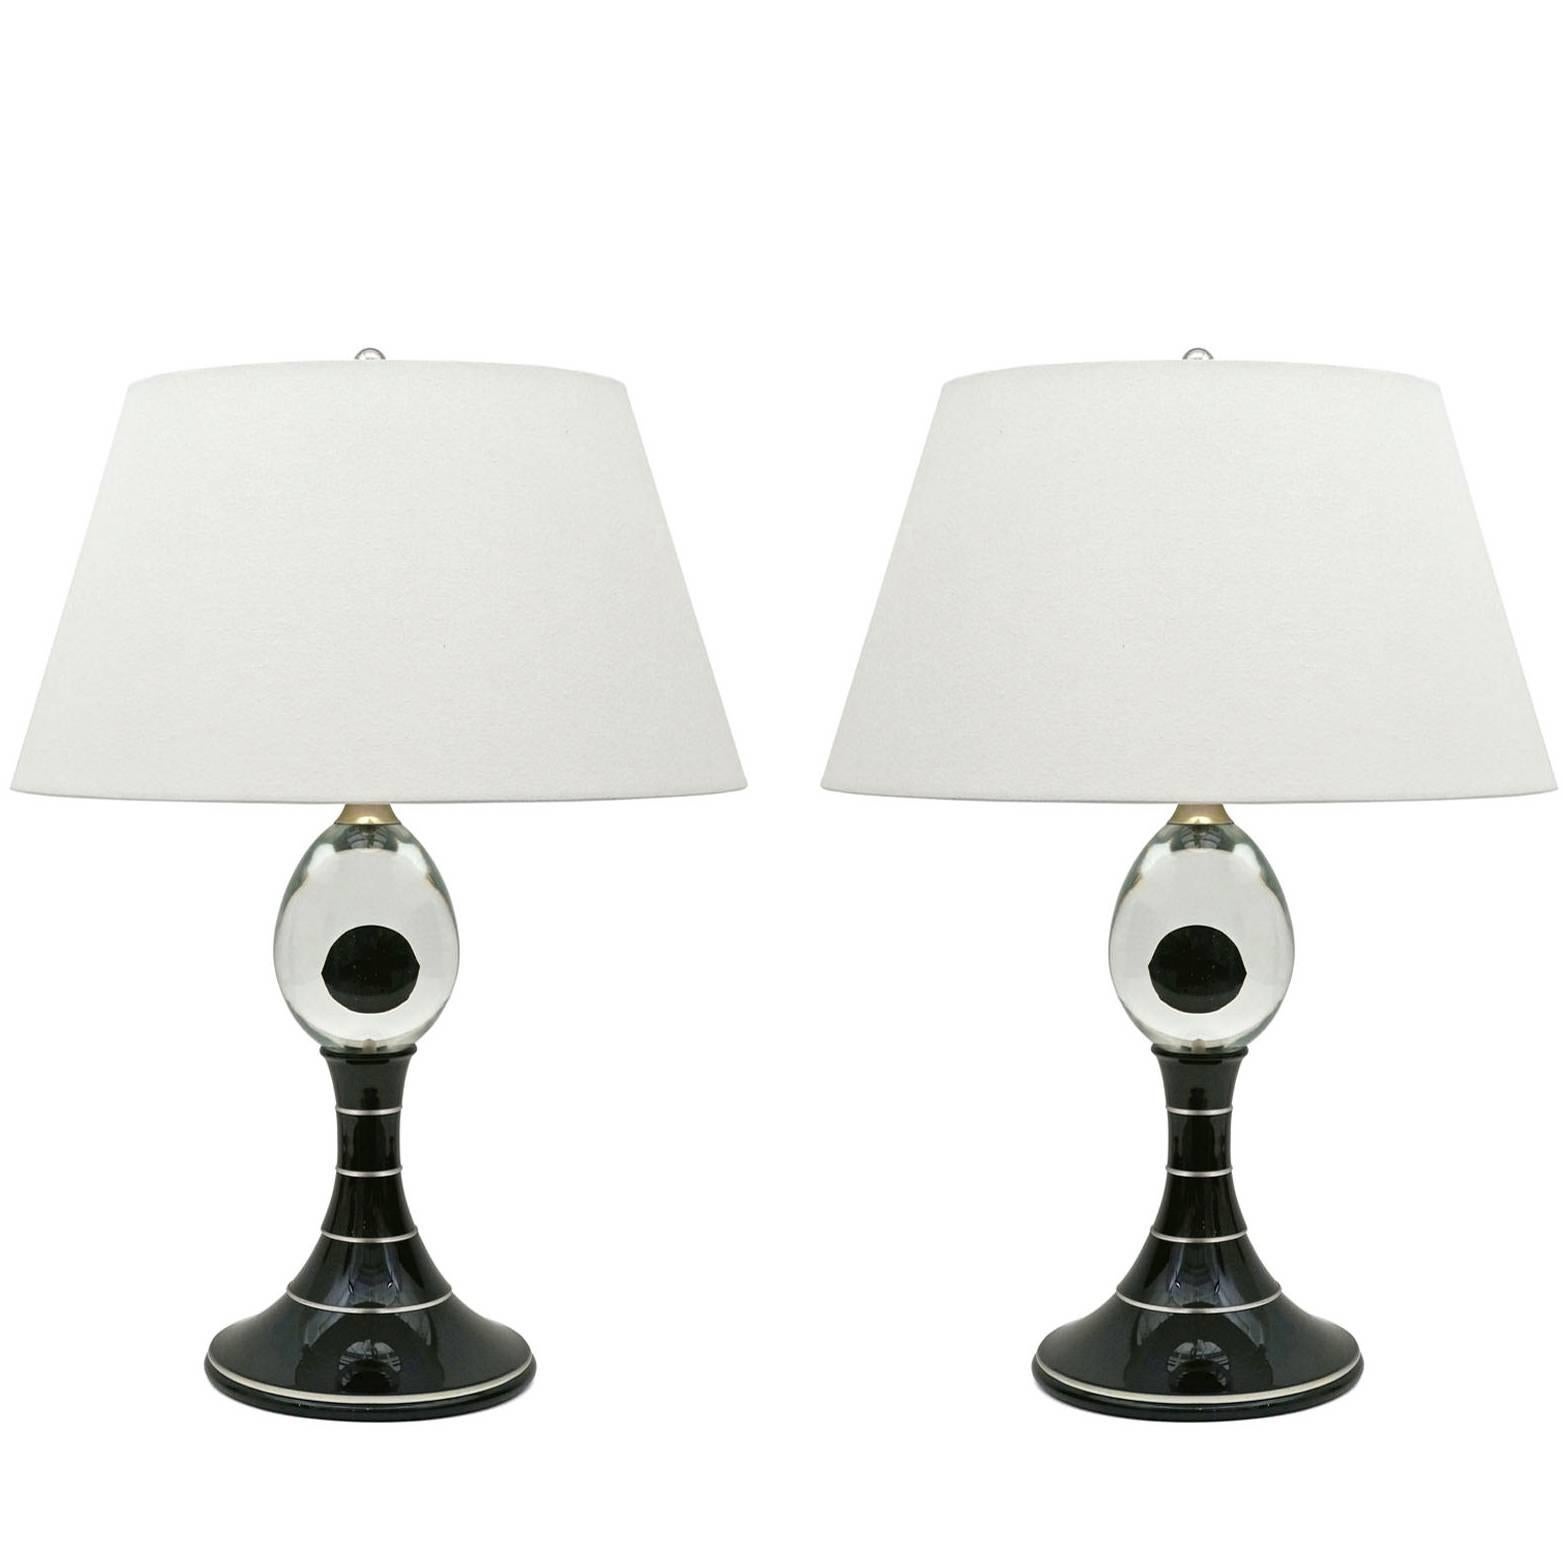 Pair of 1970s Black and Clear Glass Table Lamps with Flared Bases, France